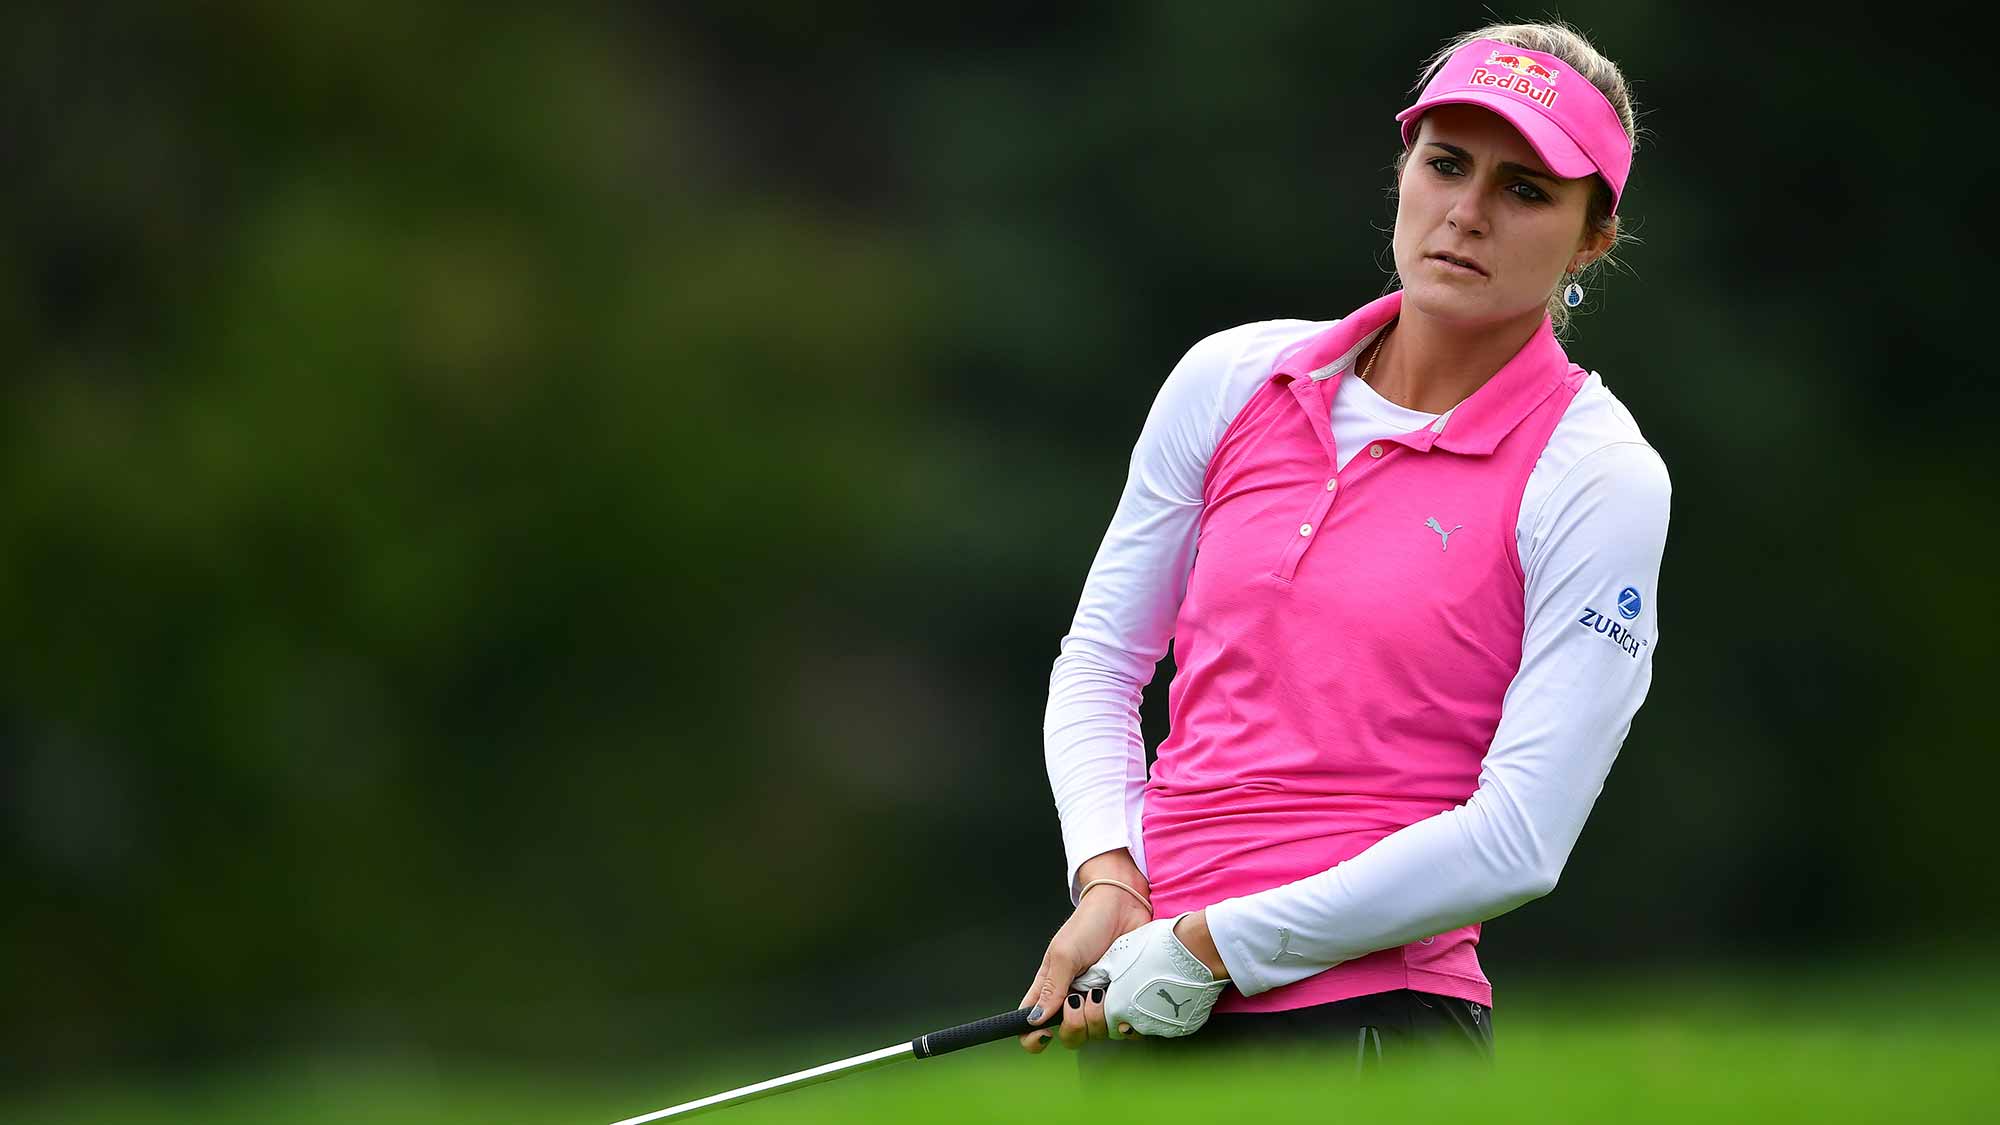 Lexi Thompson during the pro-am prior to the start of the Evian Championship at Evian Resort Golf Club